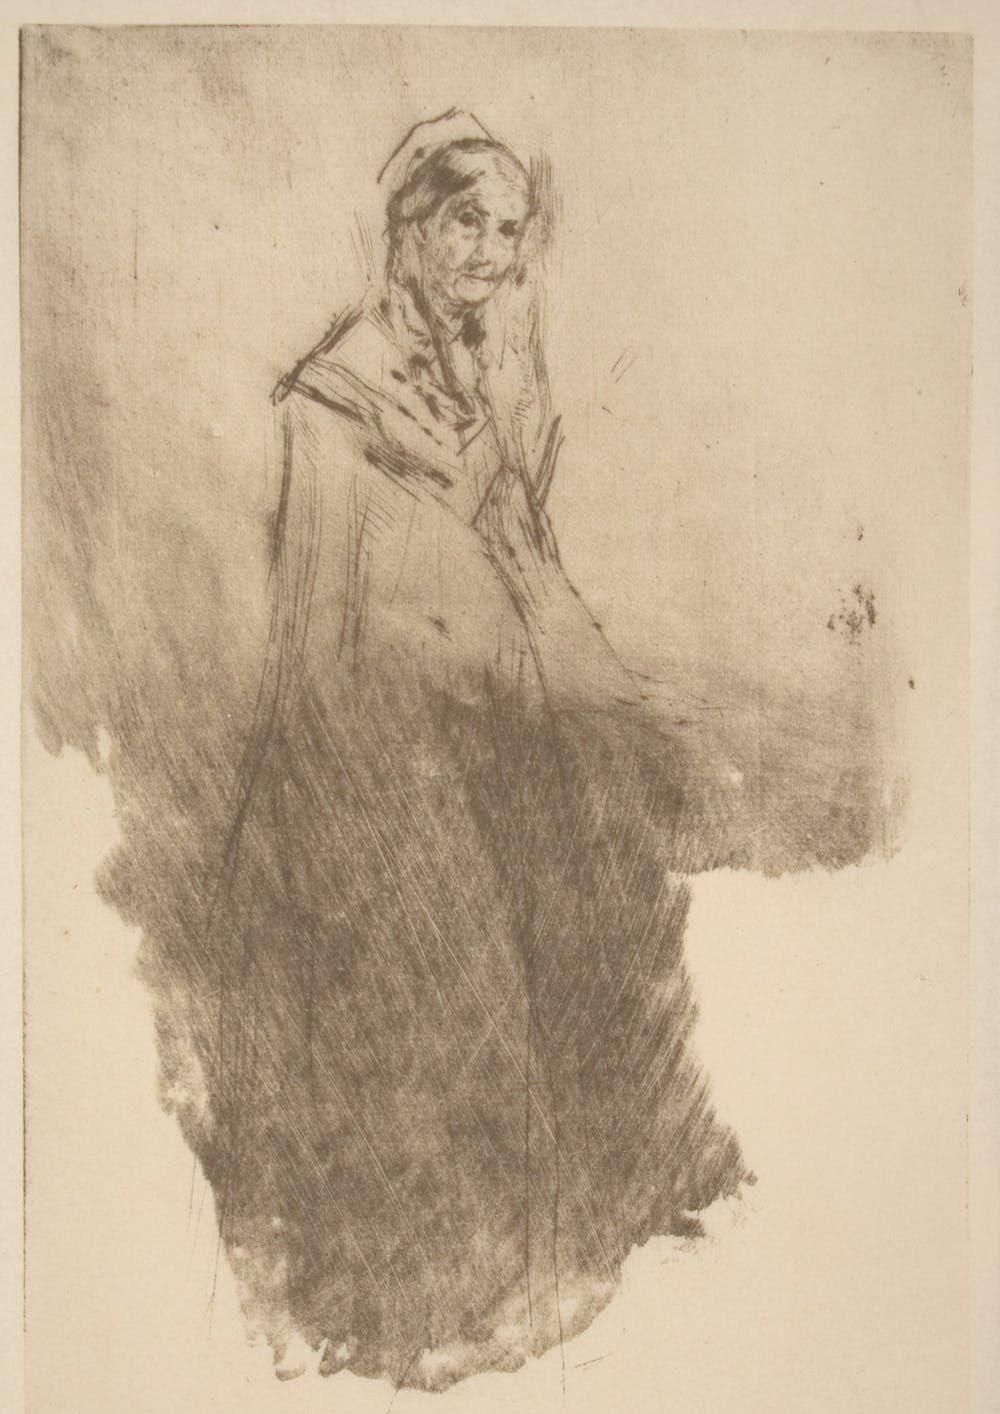 James Whistler’s sketch of the originally proposed pose for his Arrangement in Grey and Black, No. 2. Anna decided she wouldn’t be able to stand long enough in this pose. The Whistler Collection, the University of Glasgow Sp.jpg